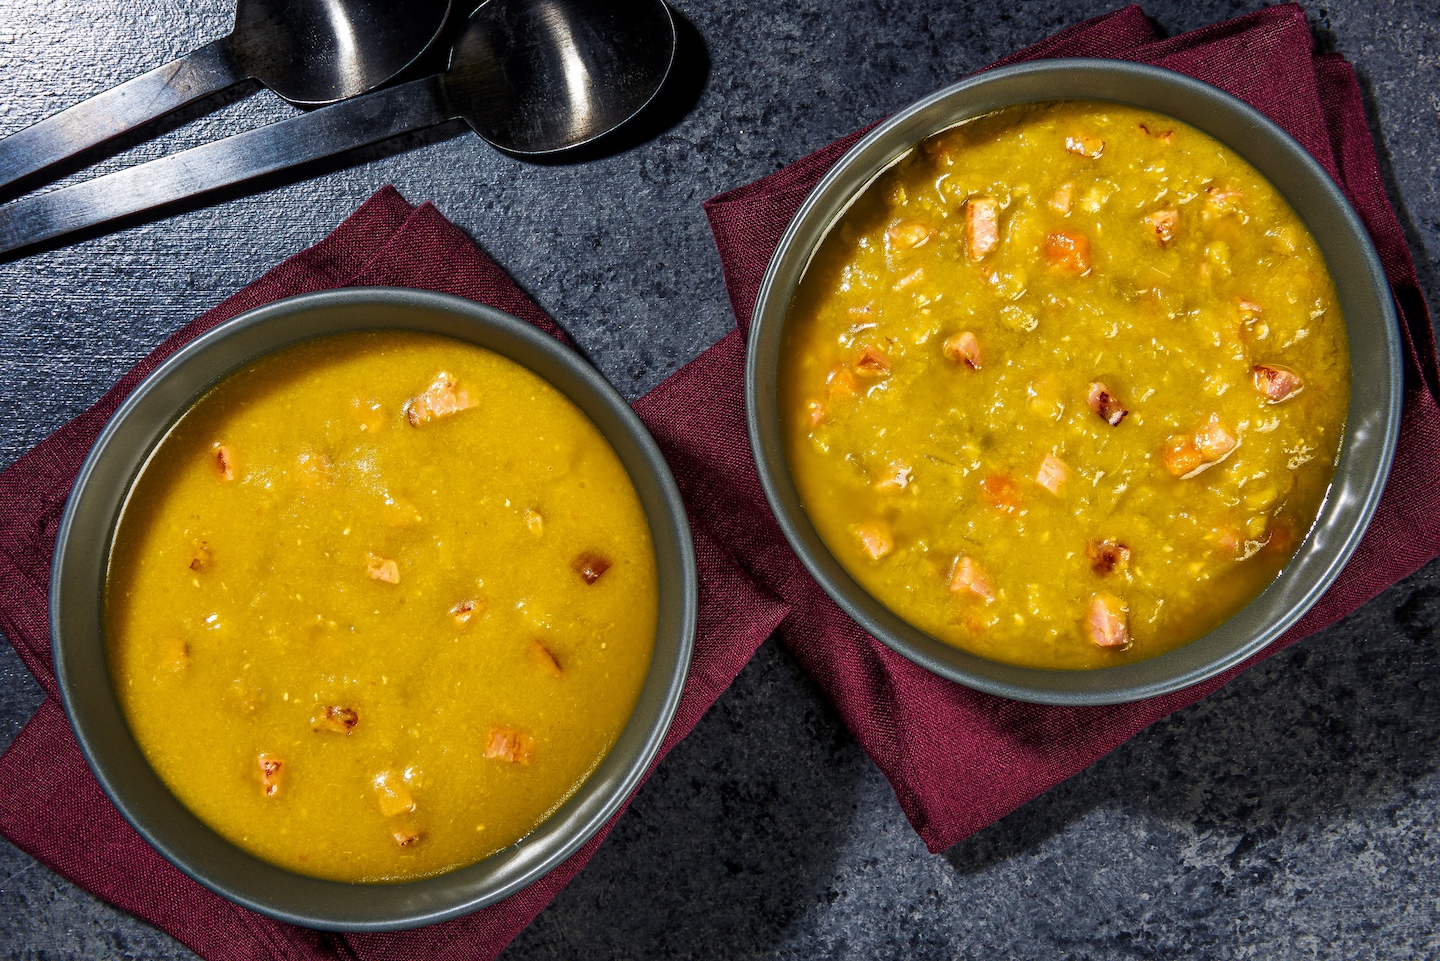 This split pea soup with ham makes a tasty memory, chunky or smooth